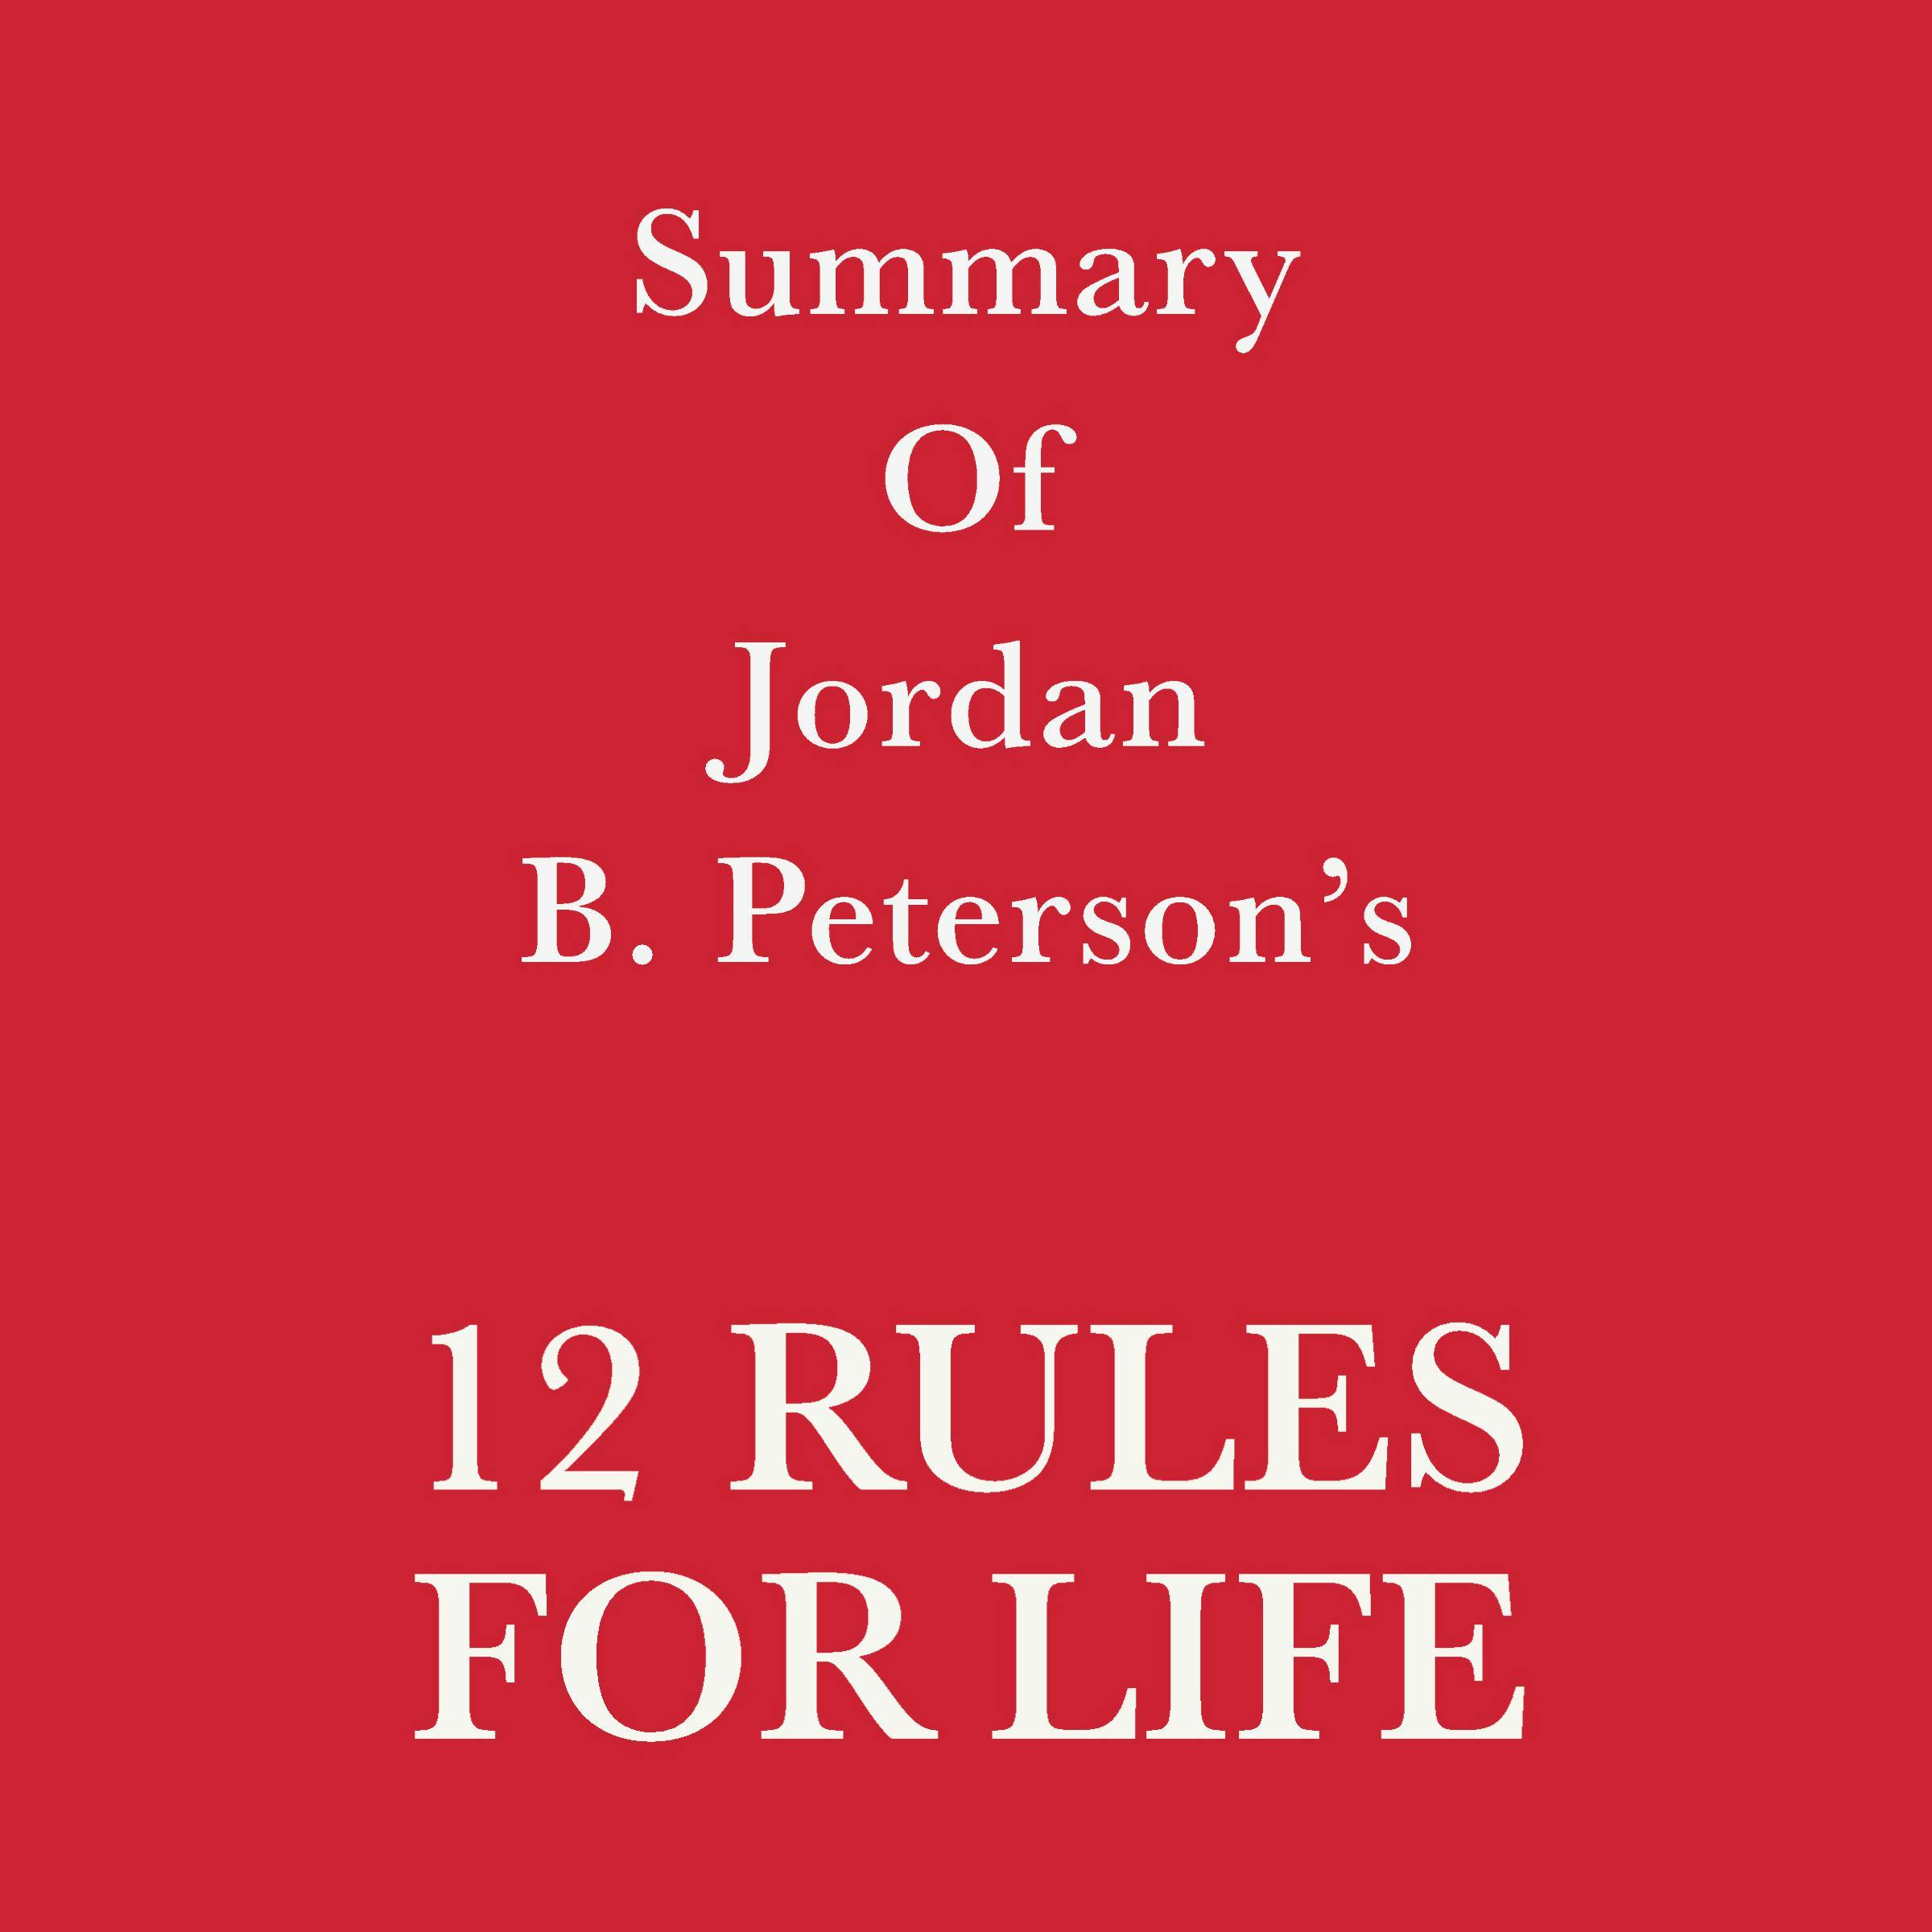 Summary of Jordan B. Peterson's 12 Rules for Life - undefined